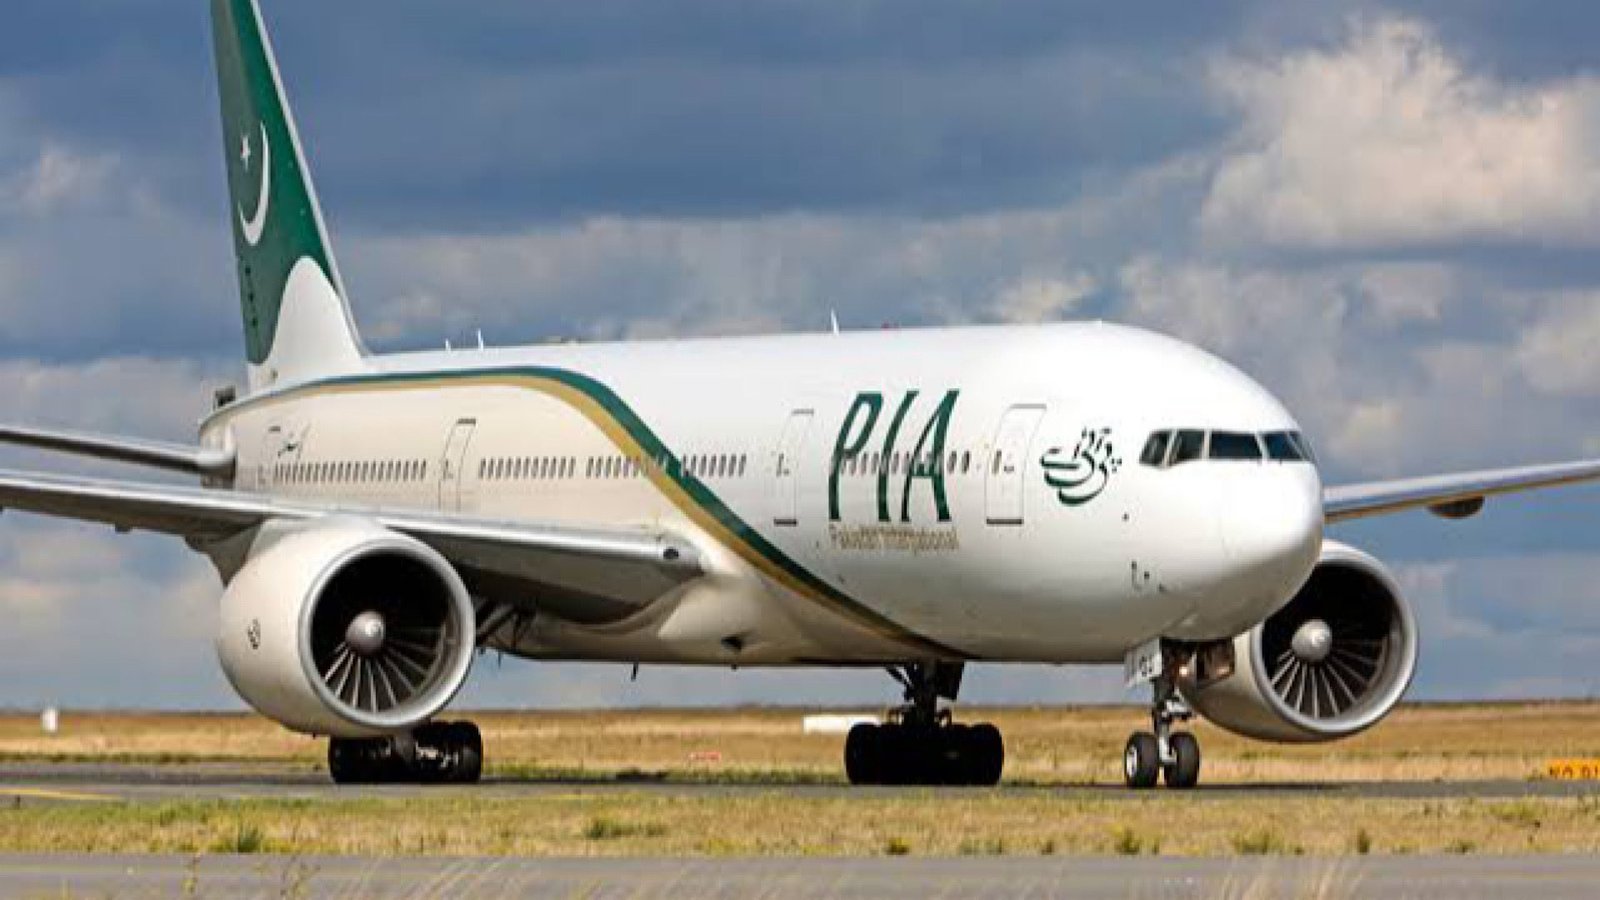 PIA Resumes Flights to UAE After Weather Improvement